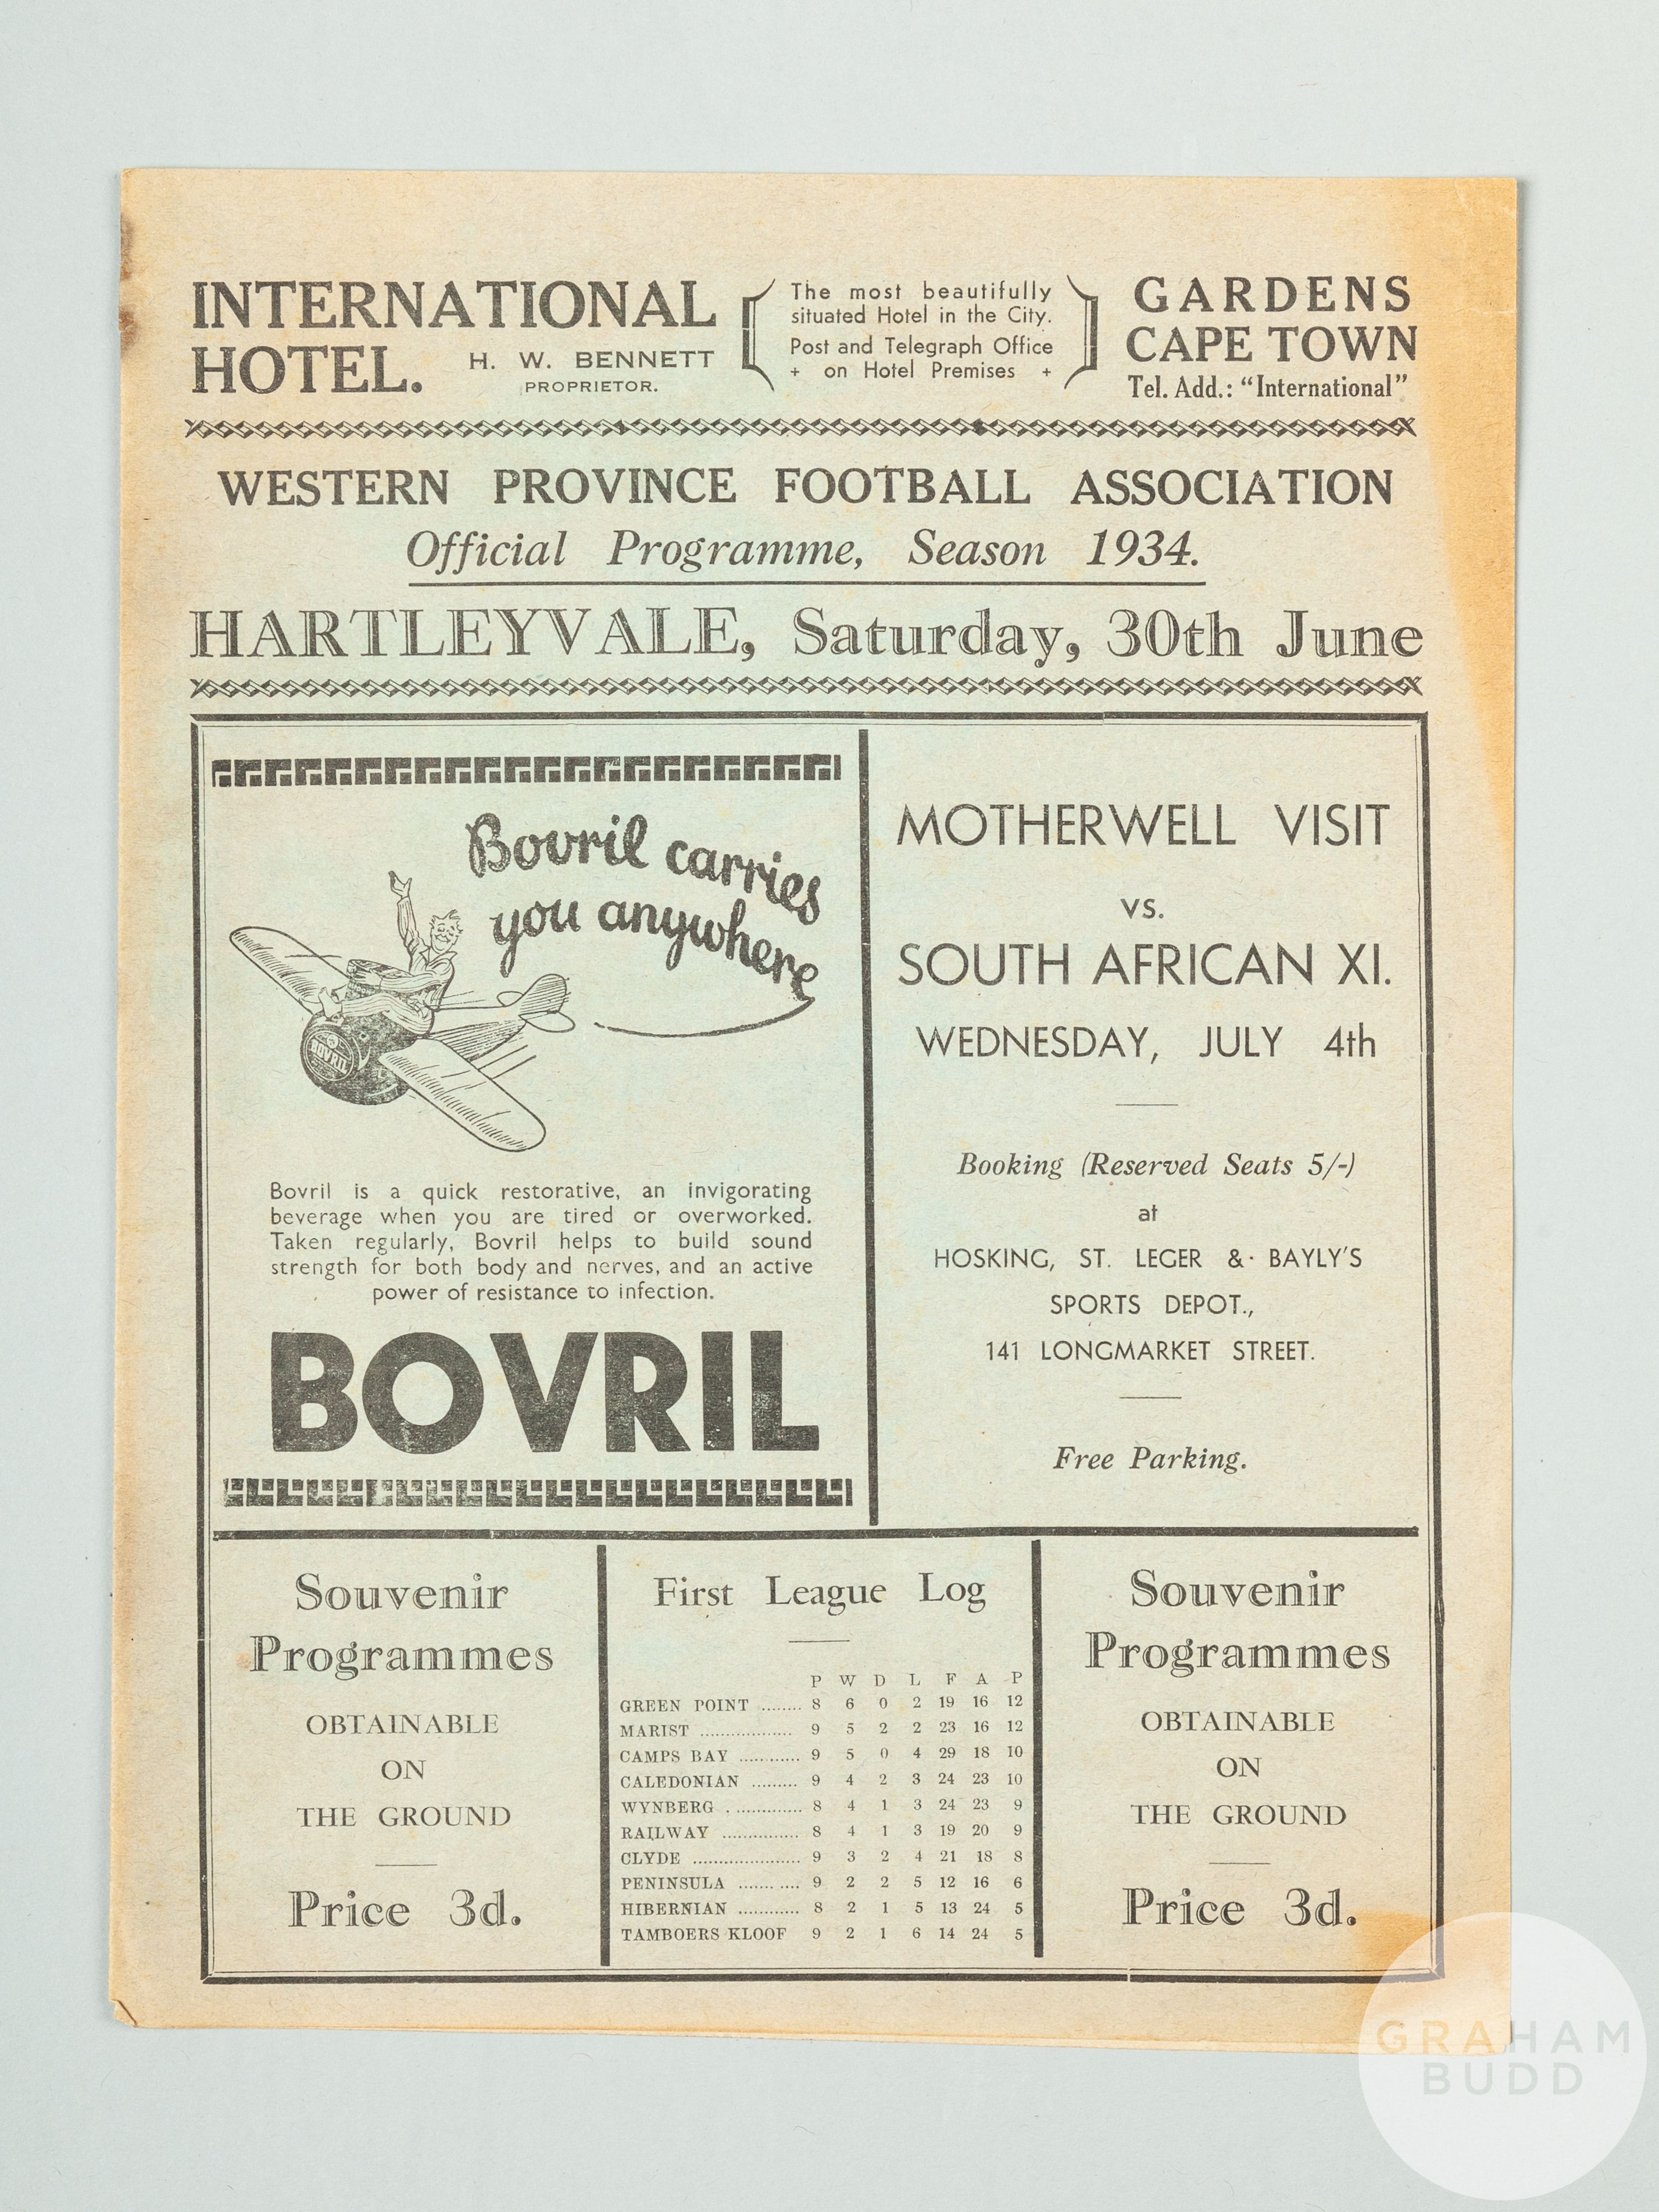 Western Province v. Motherwell Tour match programme, 30th June 1934 - Image 2 of 2